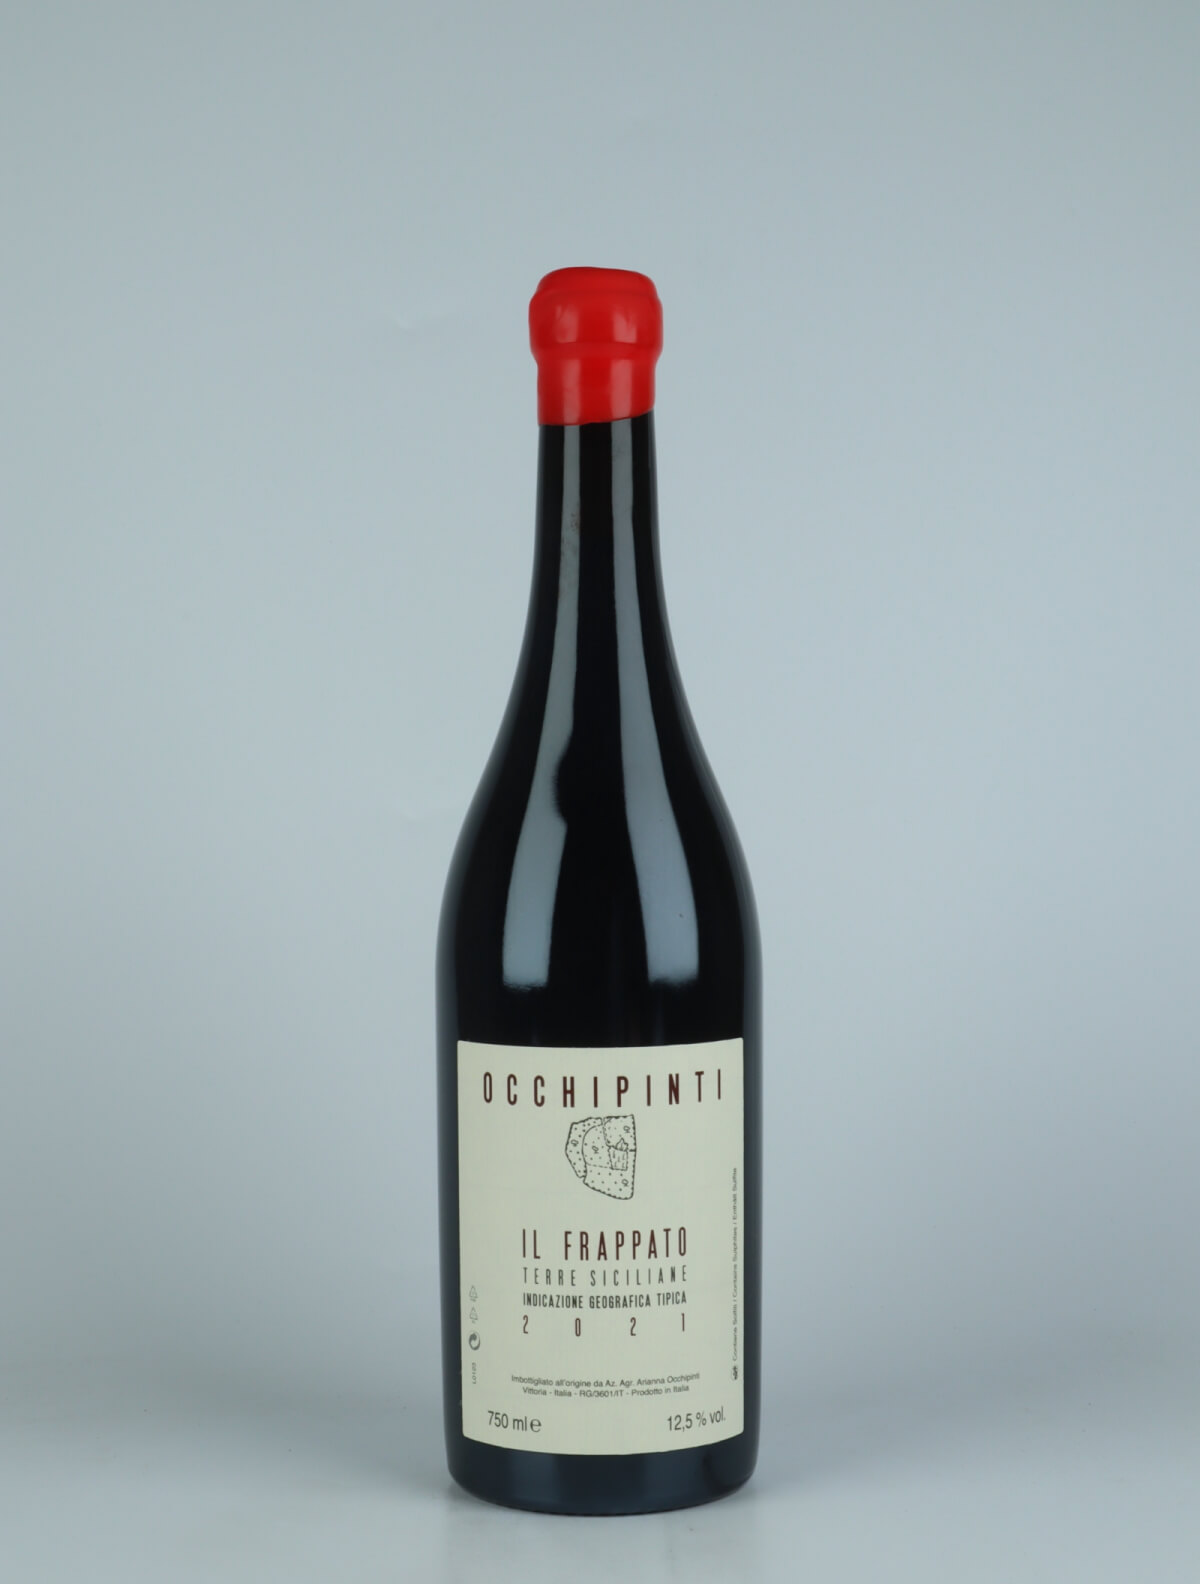 A bottle 2021 Il Frappato Red wine from Arianna Occhipinti, Sicily in Italy